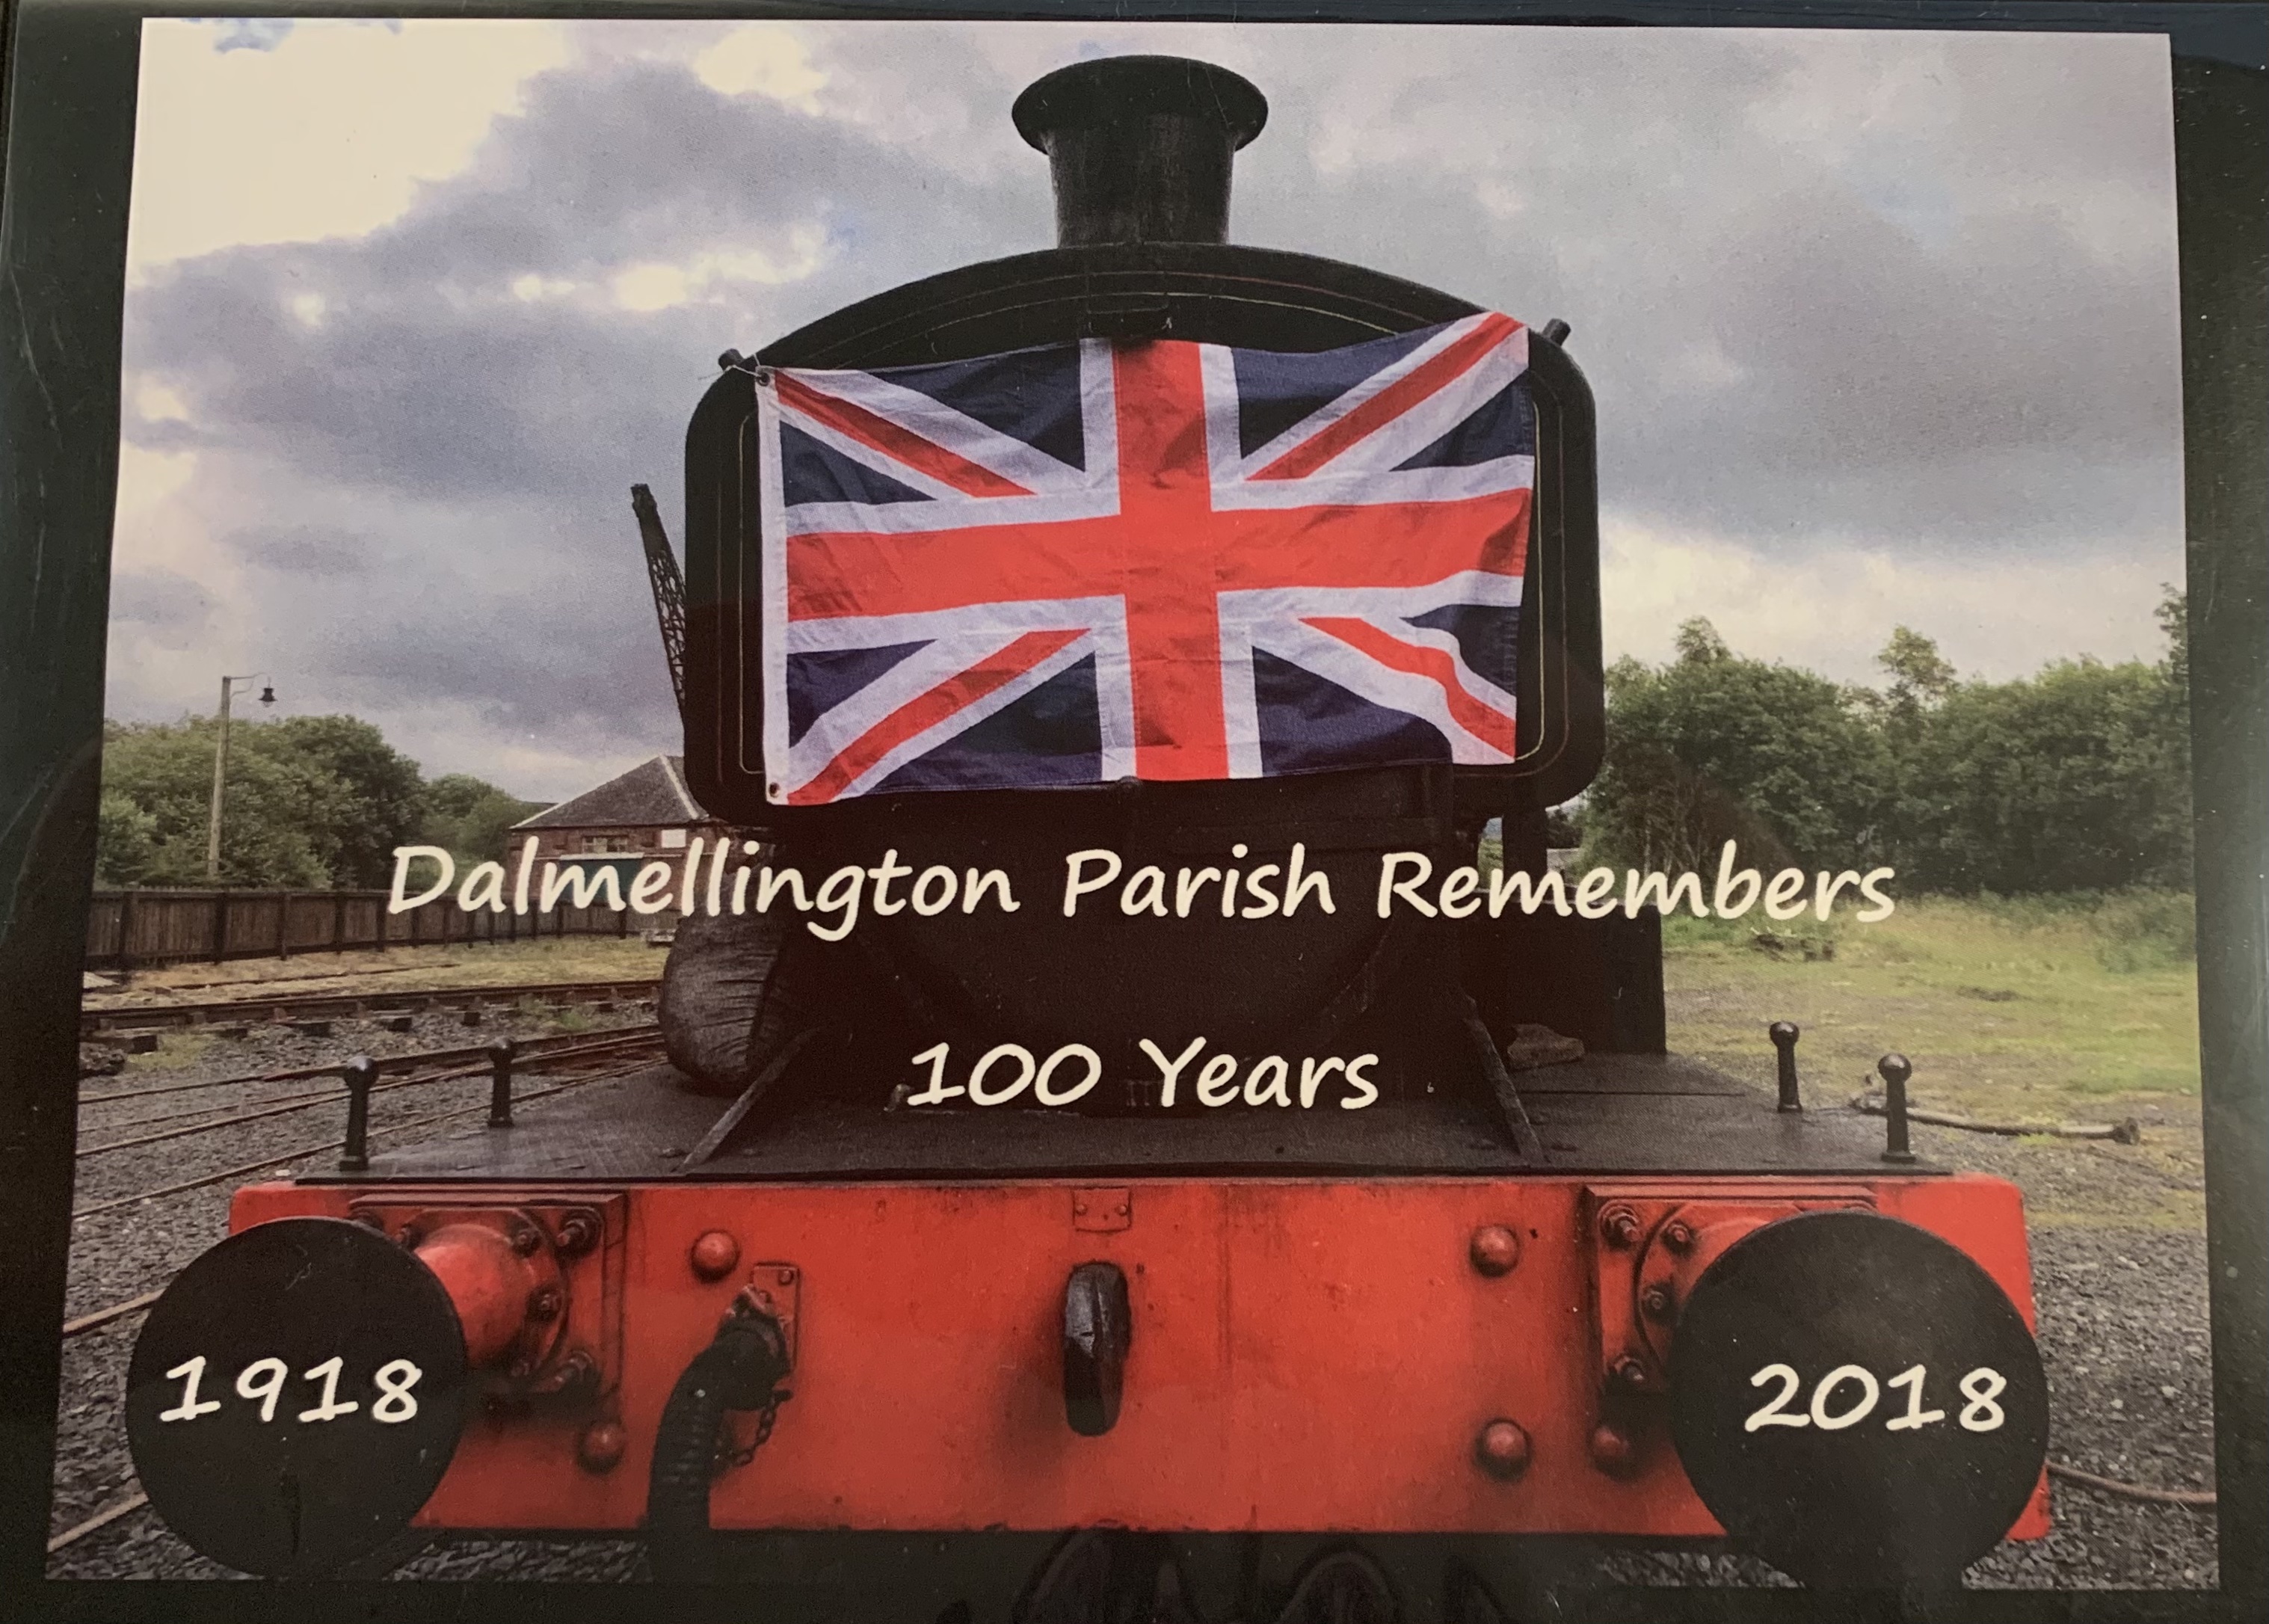 DVD cover showing a black and red steam train surrounded by trees and greenery. The text reads Dalmellington Remembers 100 years, 1918-2018